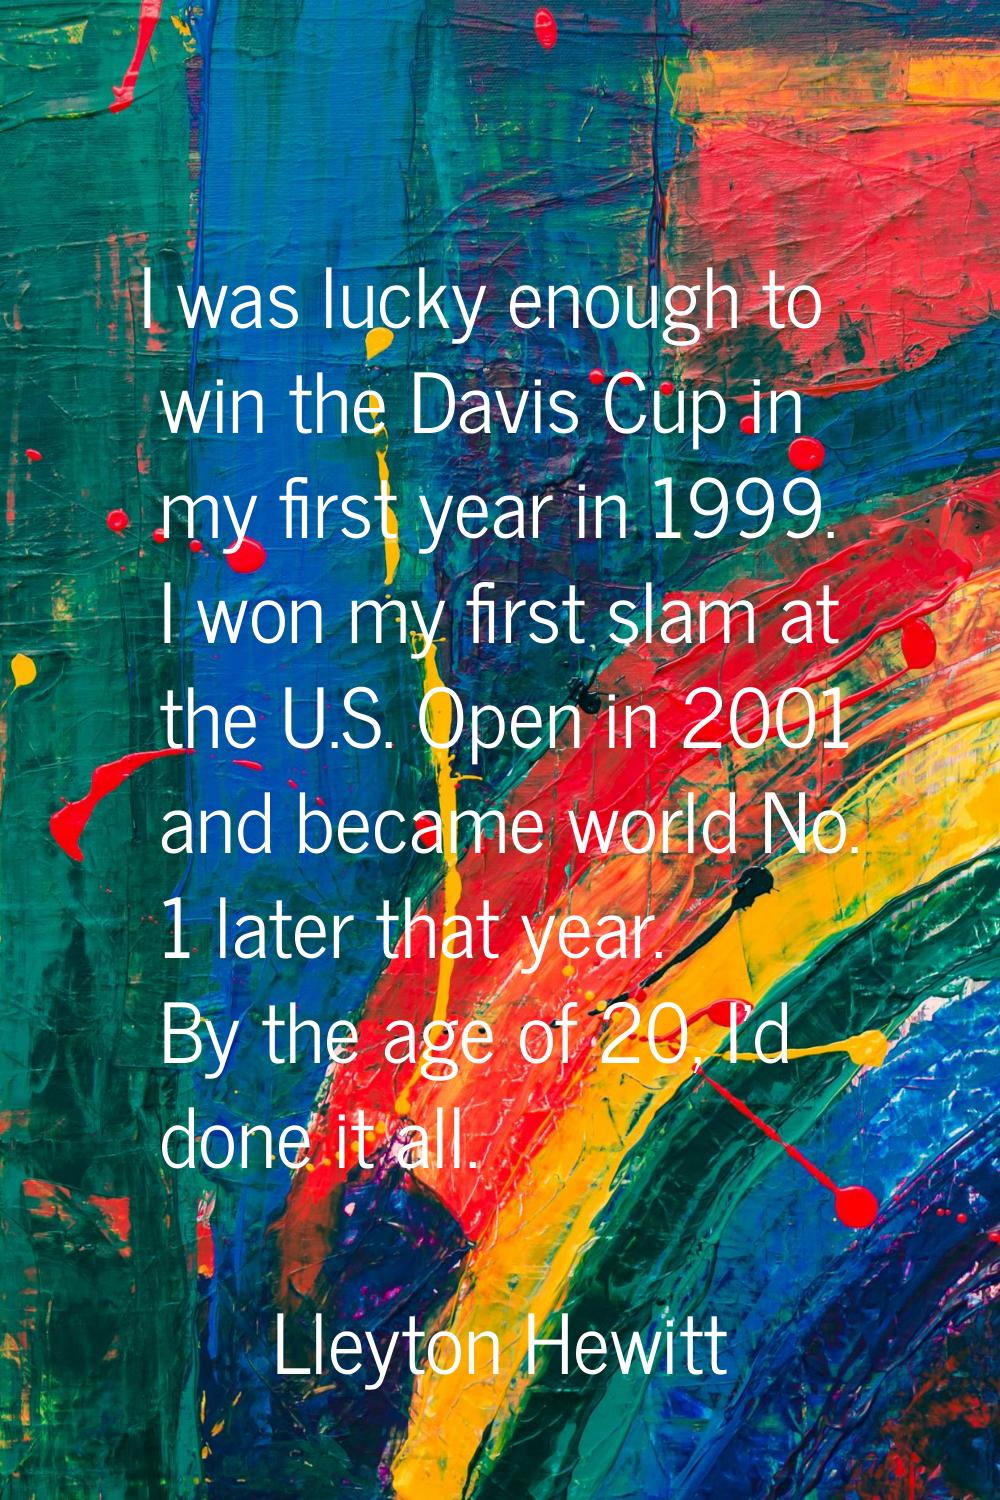 I was lucky enough to win the Davis Cup in my first year in 1999. I won my first slam at the U.S. O